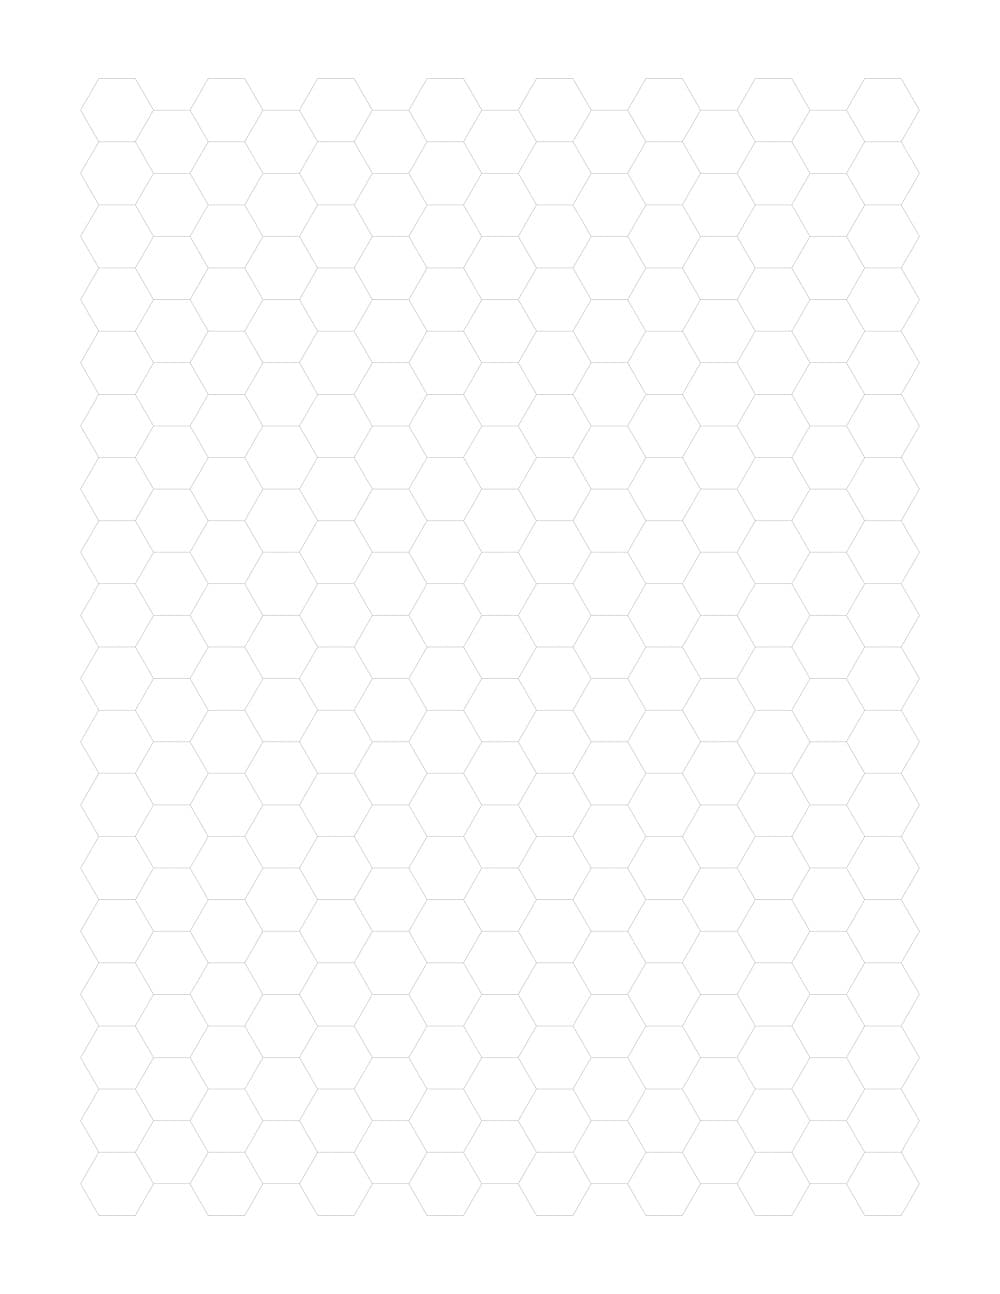 Printable Hexagon Graph Paper For Free